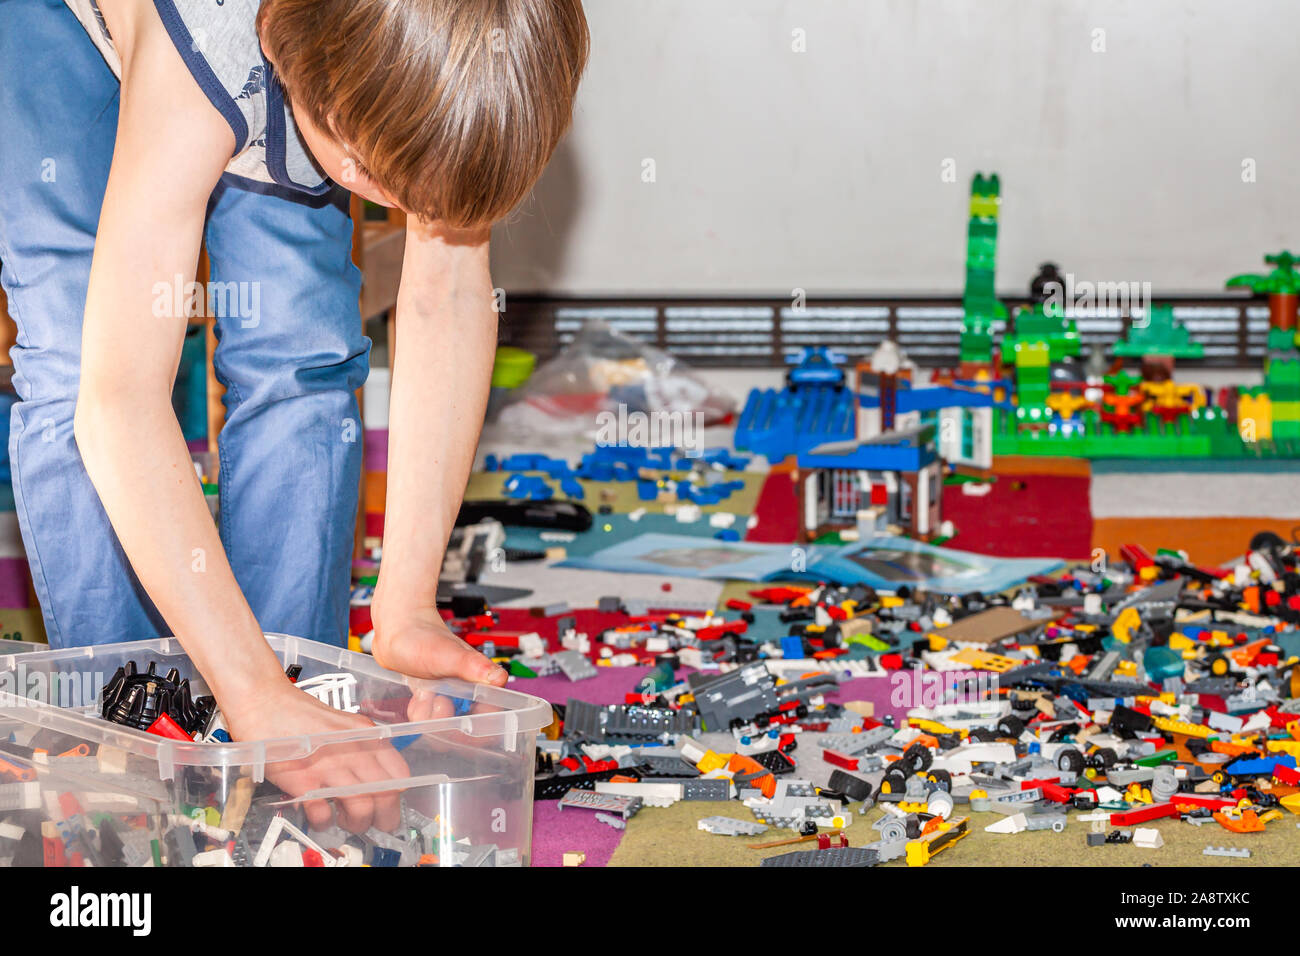 ESSEN / GERMANY - MARCH 27 2019: Boy playing with Lego, plastic construction toys that are manufactured by The Lego Group in Billund, Denmark. Stock Photo